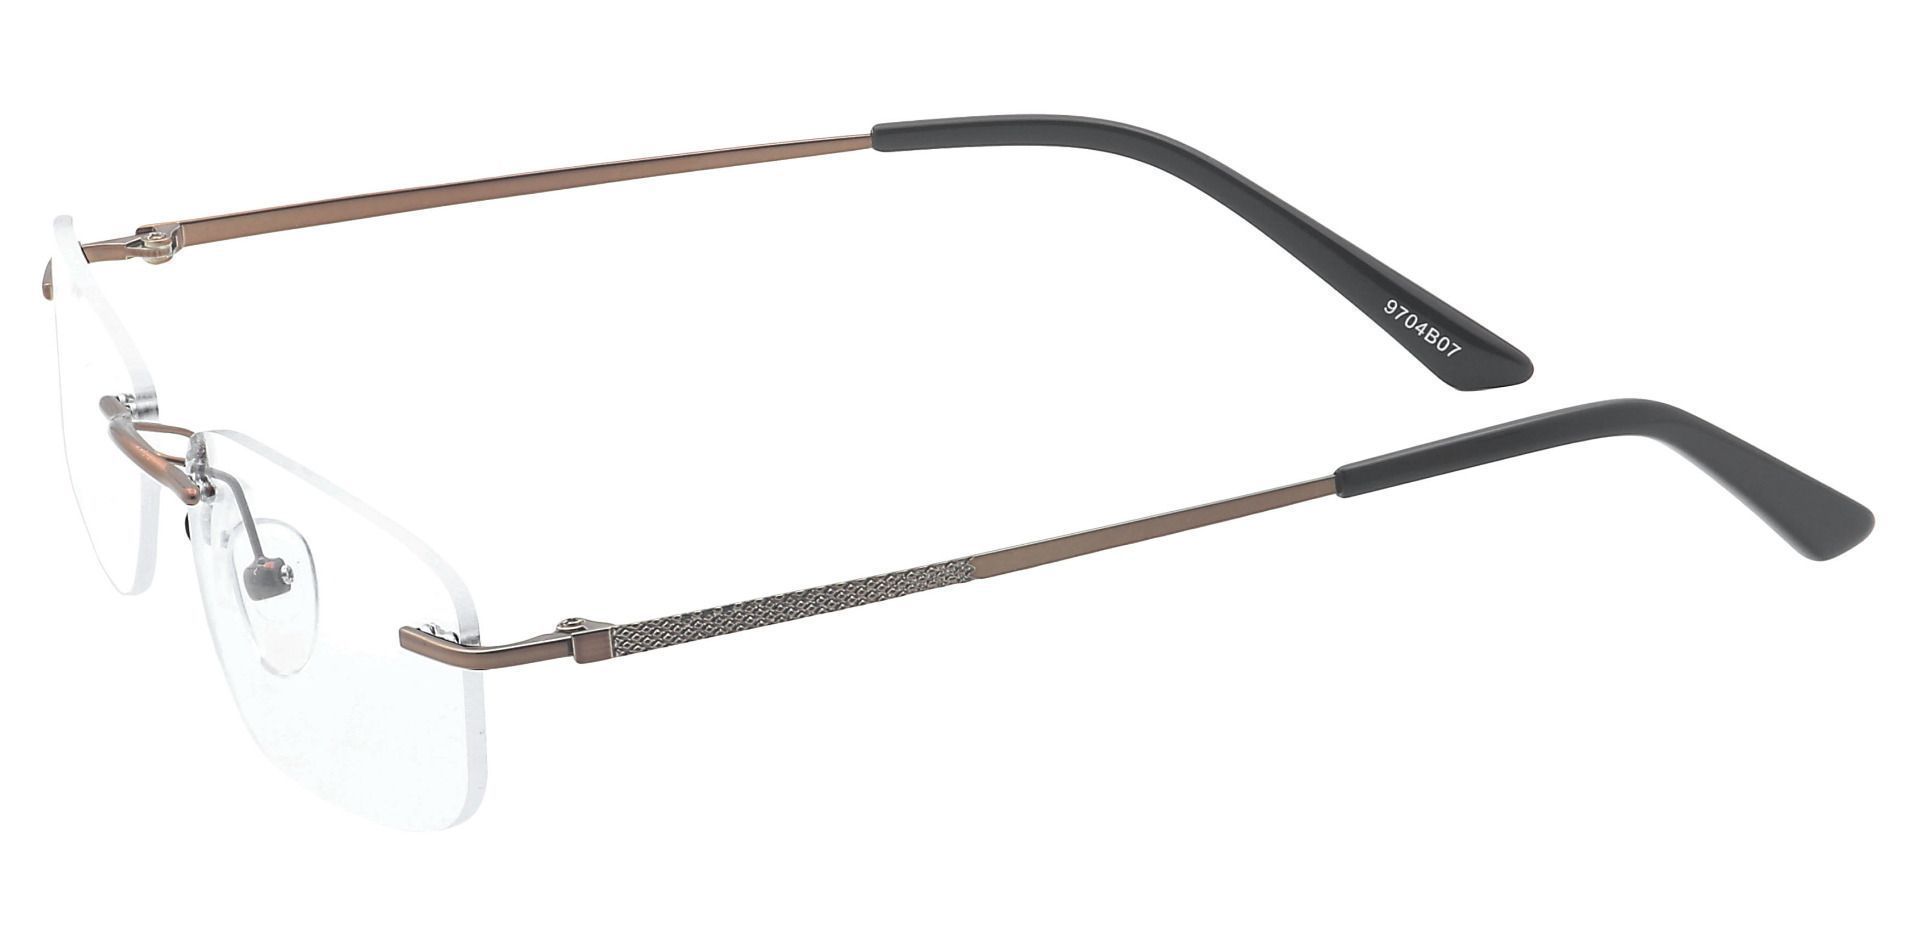 Remi Rimless Lined Bifocal Glasses - Brown